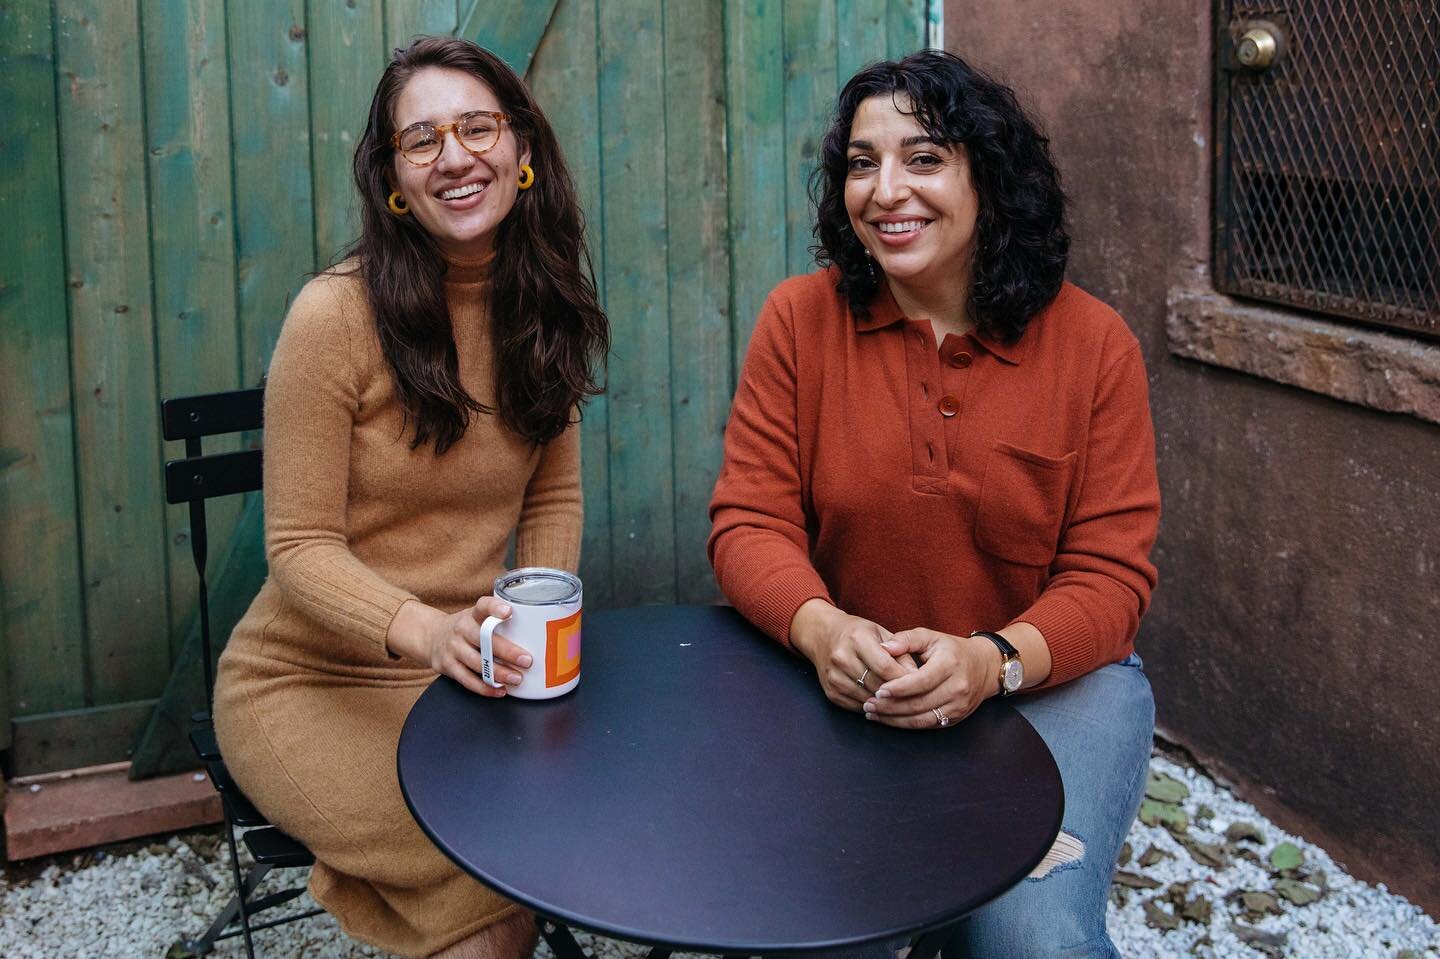 @greatergood.events Managing Partners Maryam (she/her) and Justine (she/her) are honored to have been selected as 2023 Smart Woman in Meetings Award Winners. As the Co-Managing Partners of Greater Good Events and @together.events, our work is rooted 